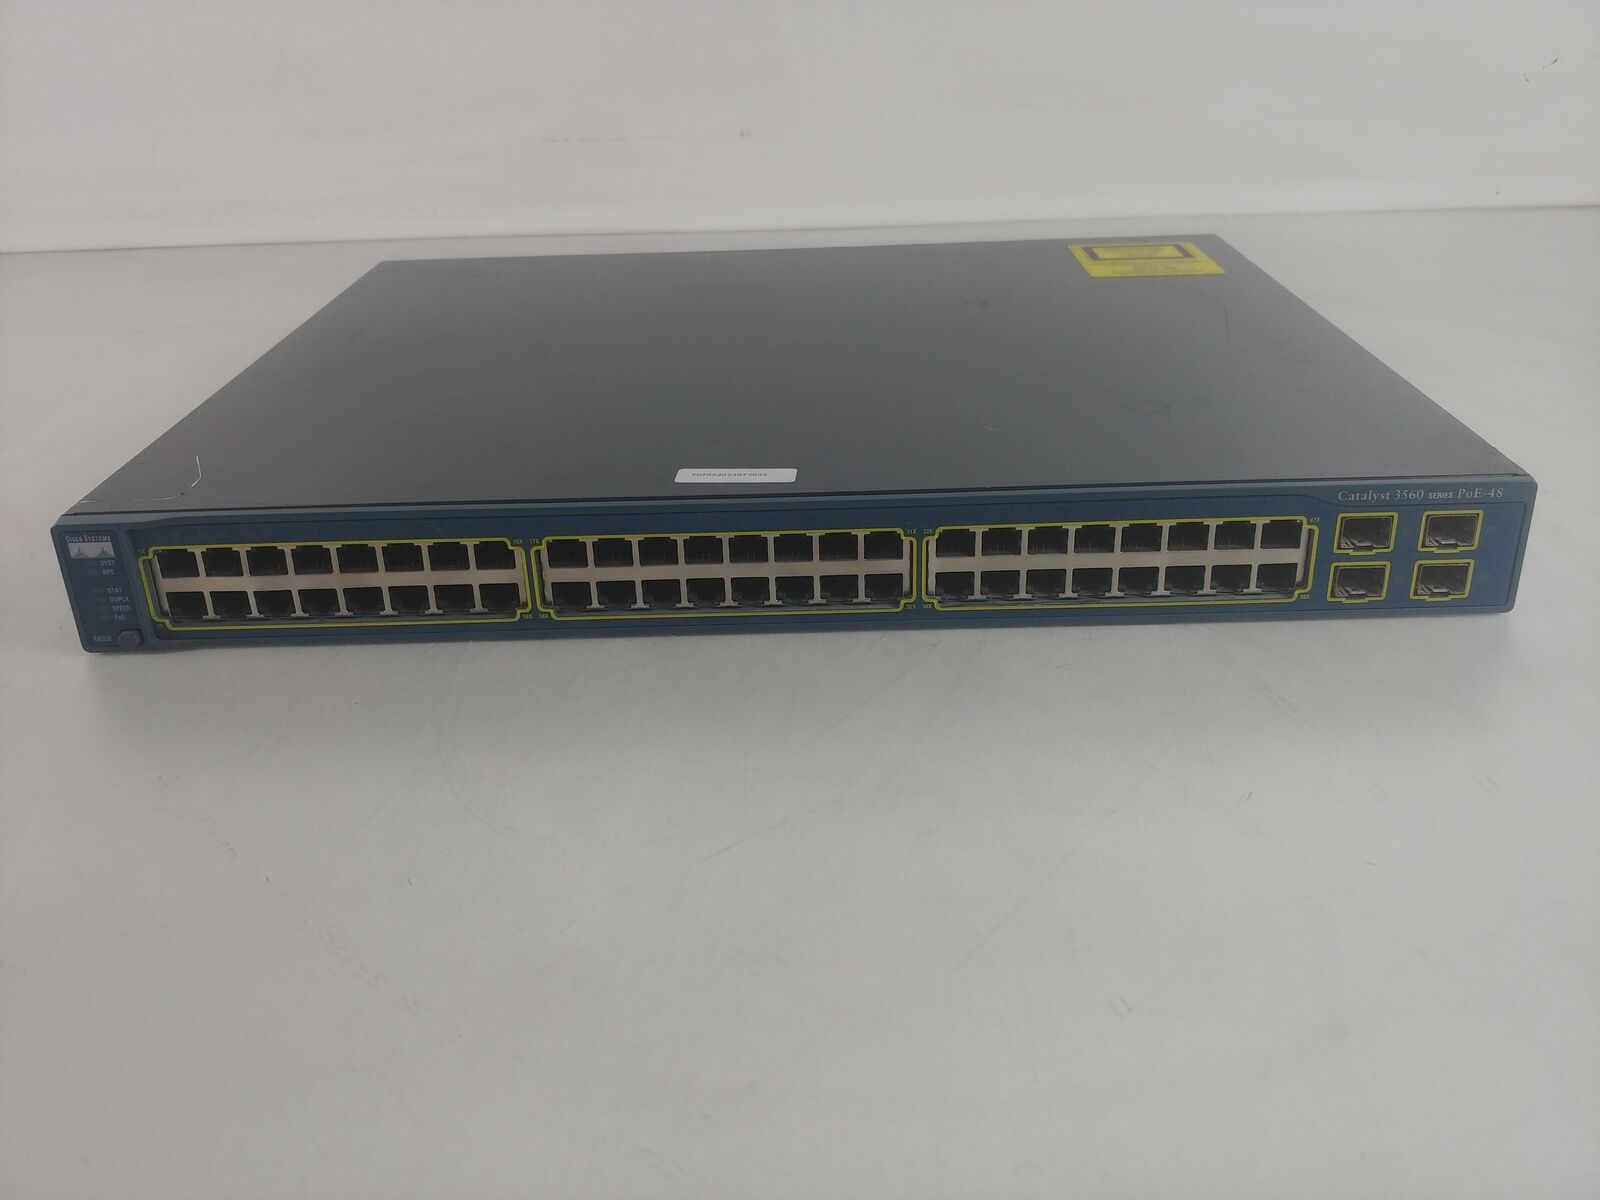 Cisco Catalyst 3560 WS-C3560-48PS-E 48 Port 100Mb/s Fast PoE Ethernet Switch